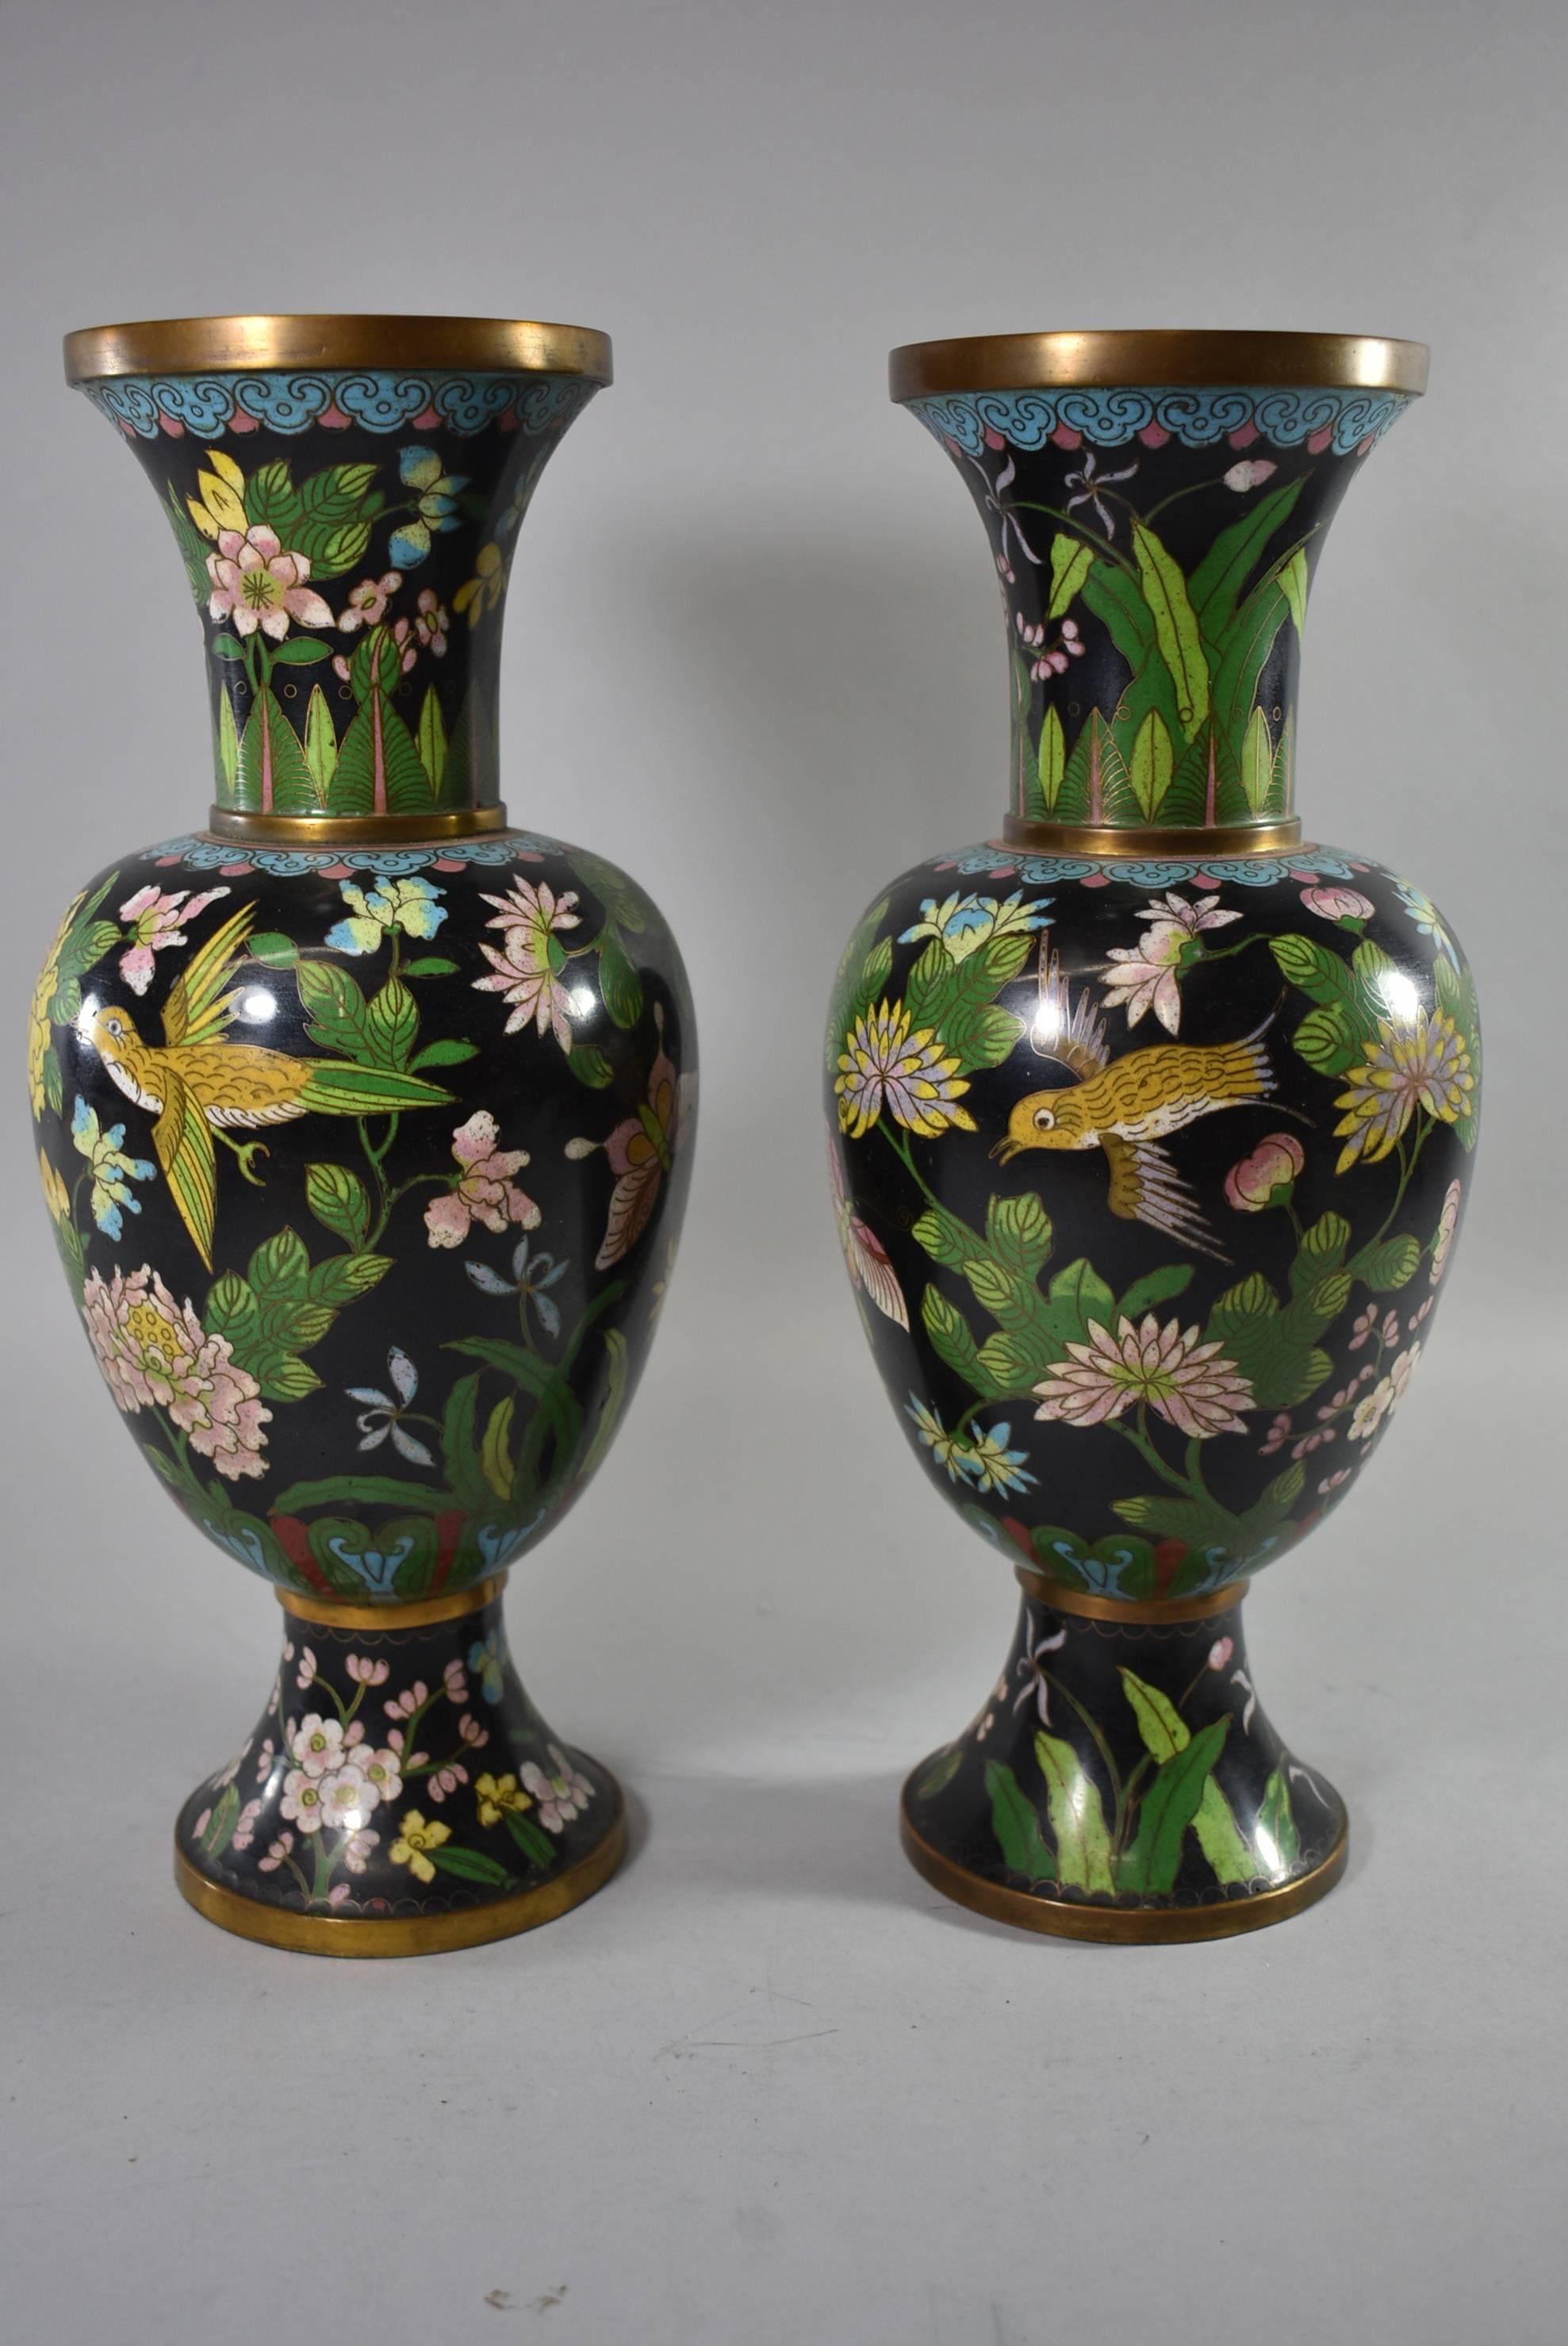 20th Century Pair of Black Chinese Cloisonne Vases with Birds and Butterflies